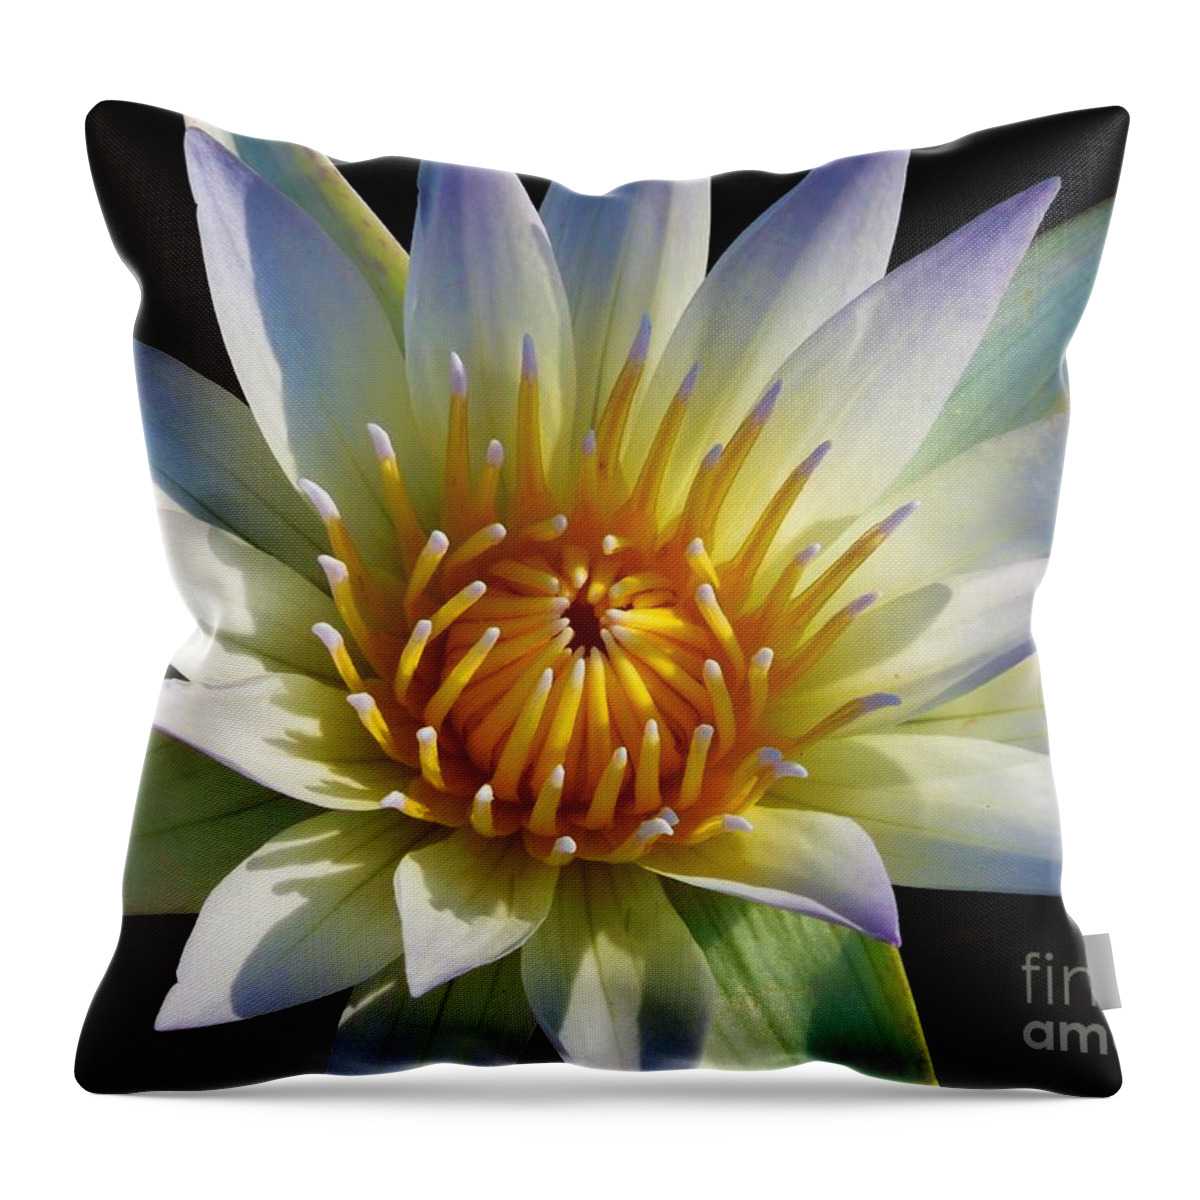 Water Lily Throw Pillow featuring the photograph Fairest Lily by Chad and Stacey Hall